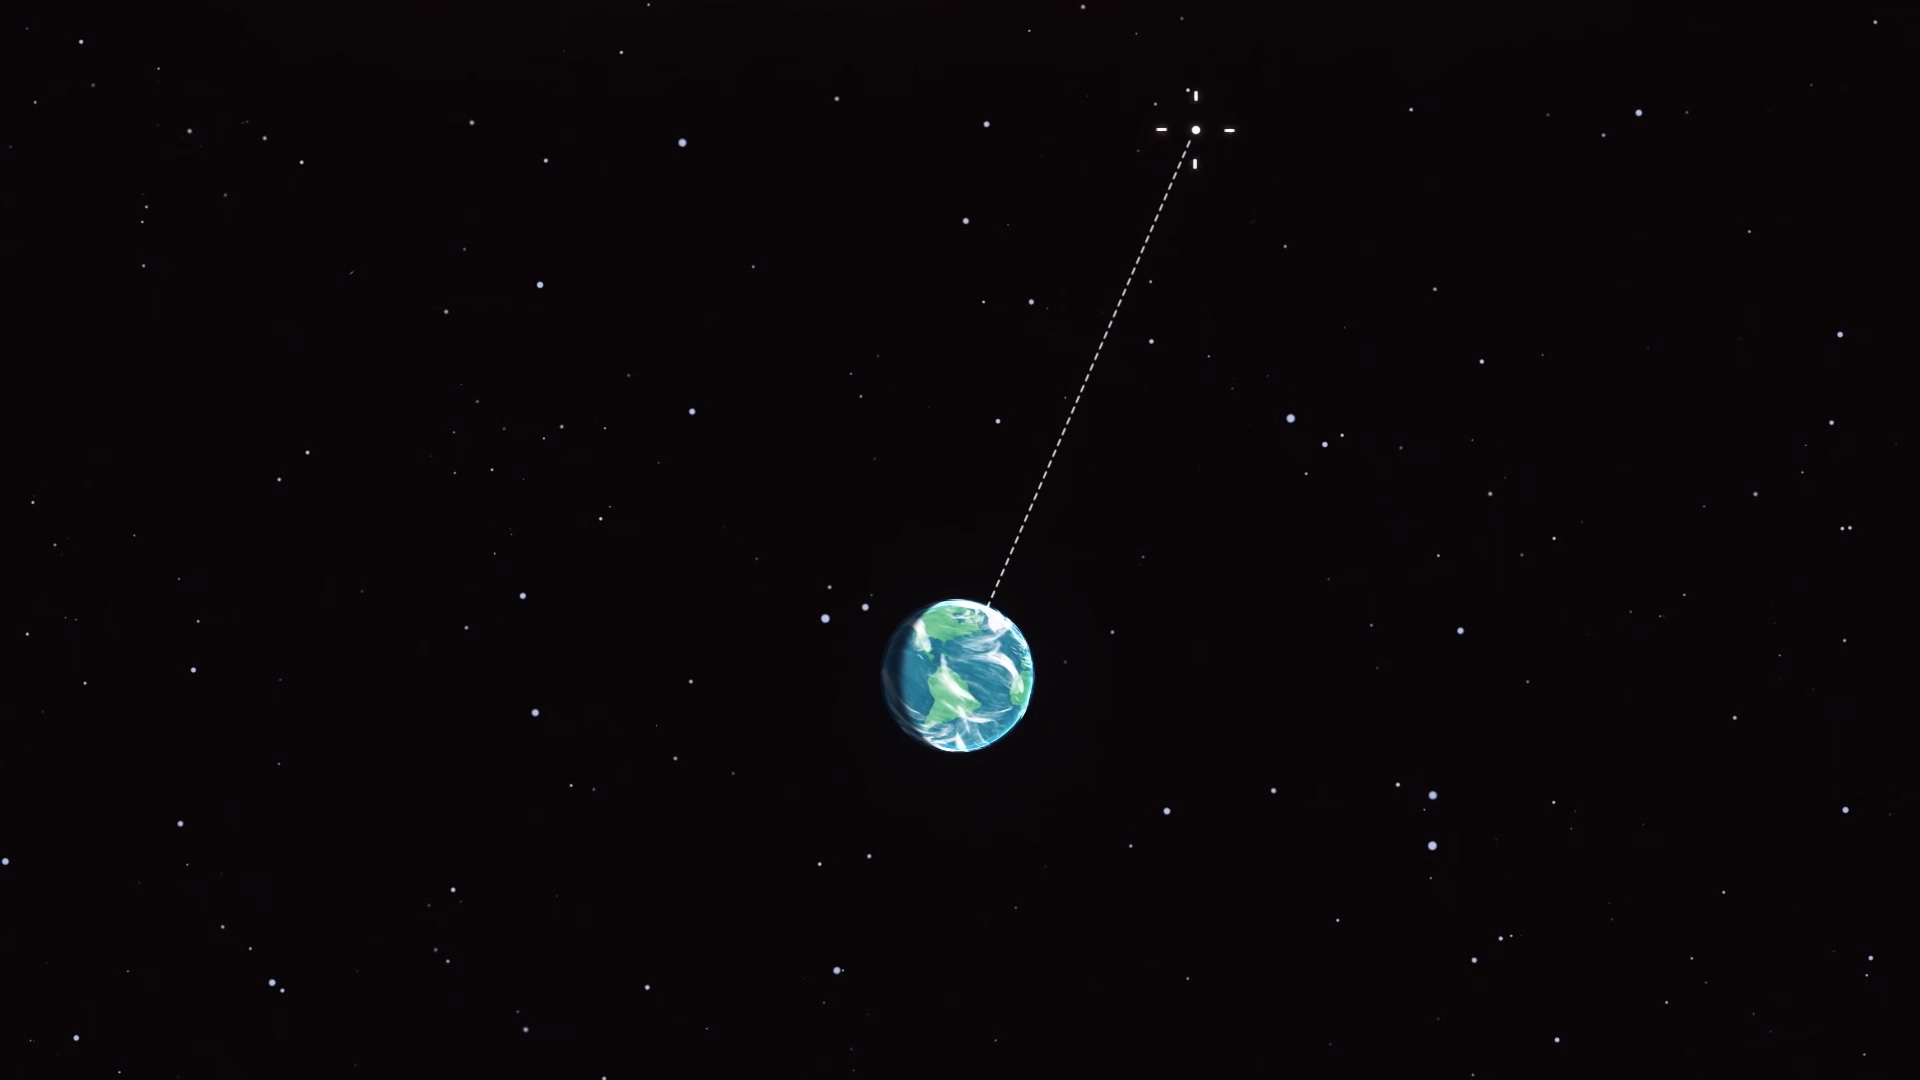 Diagram of the North Star's location compared to Earth's axis of rotation